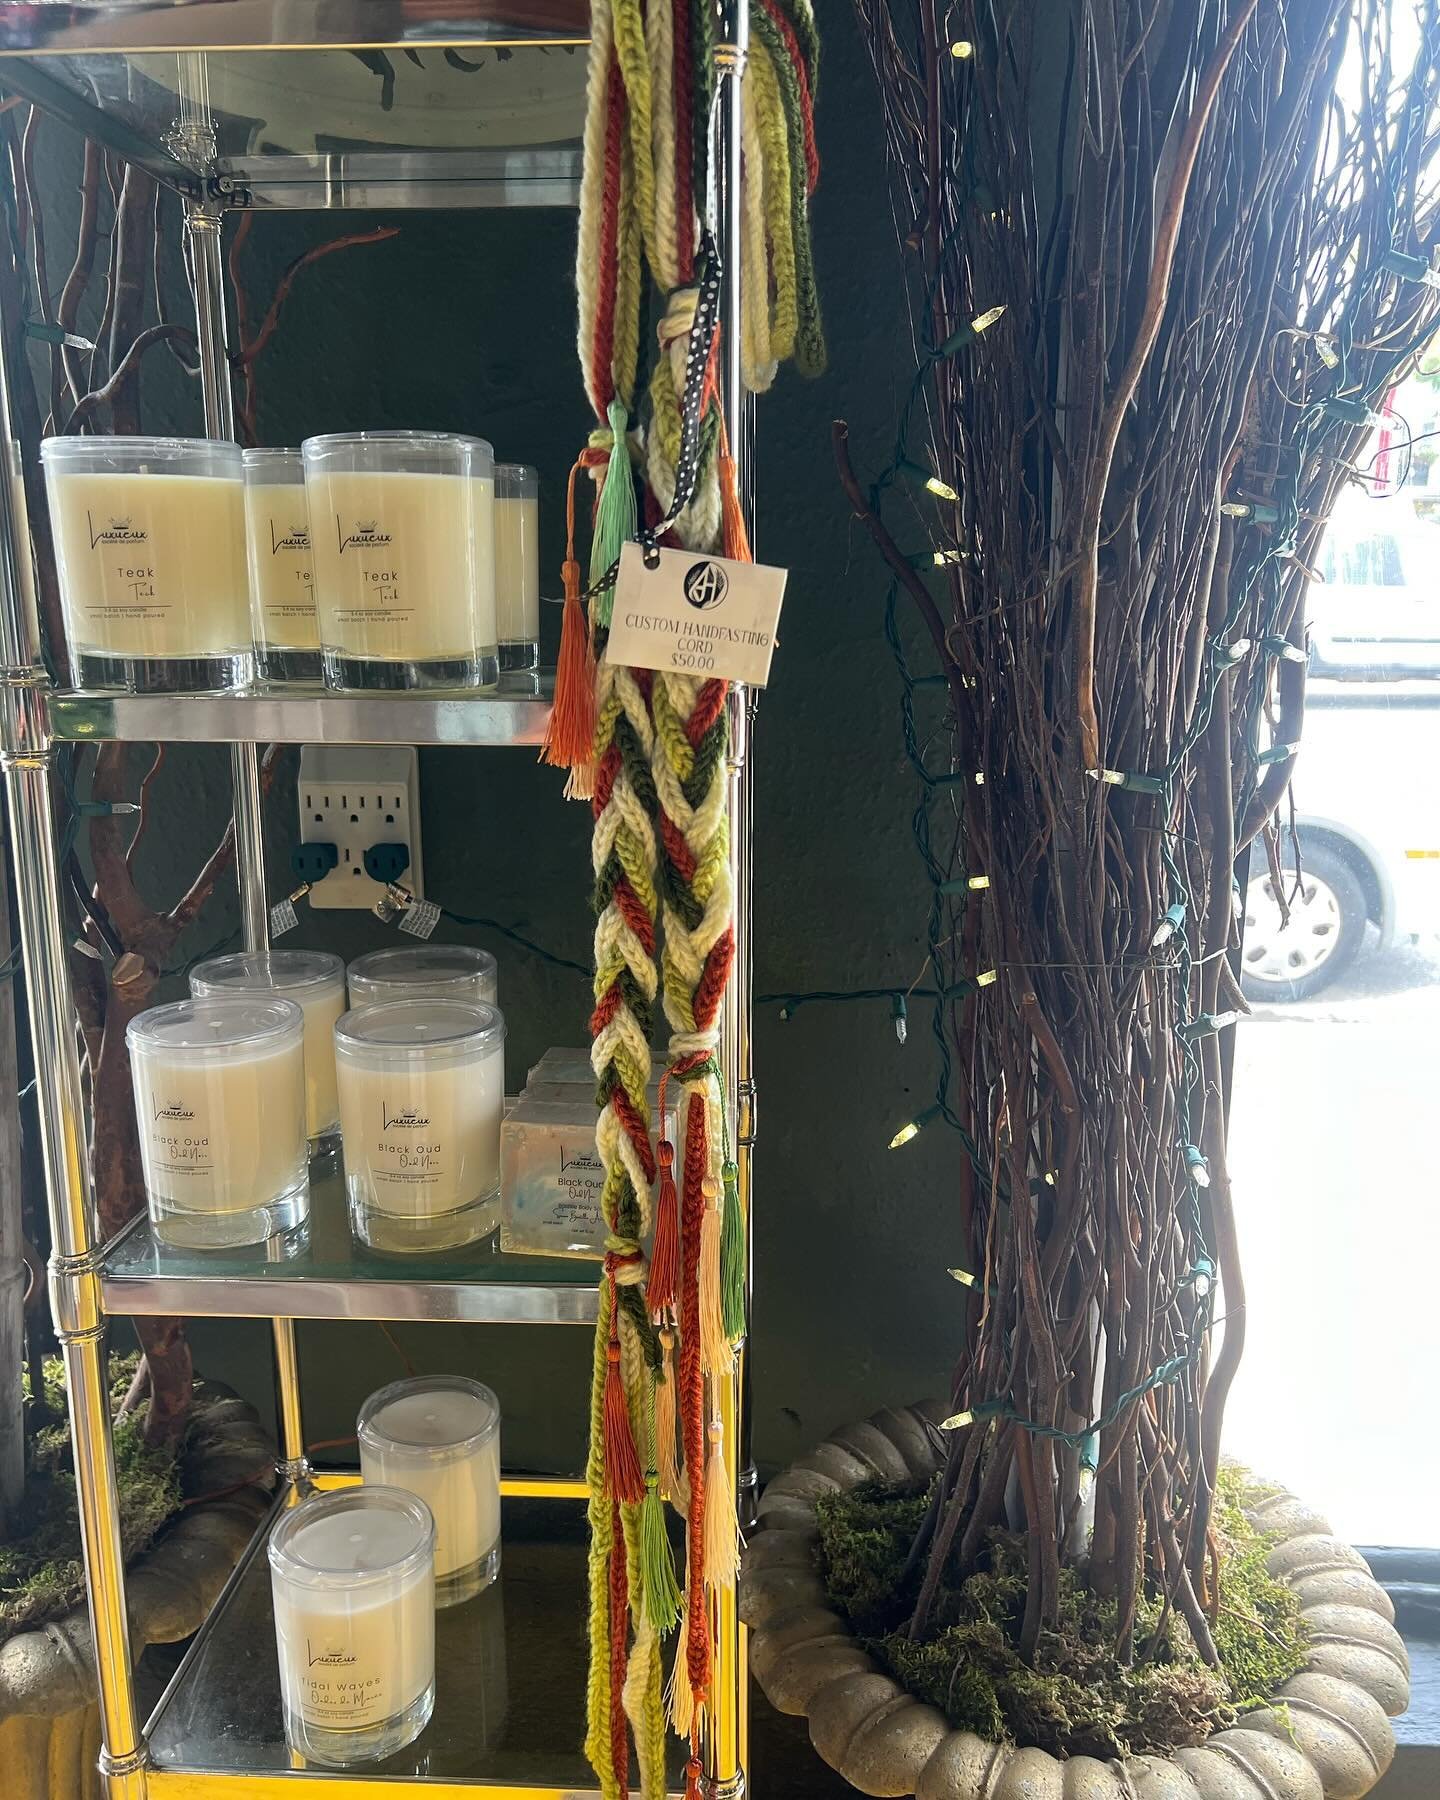 Now offering custom Hand Fasting Cords. Each is hand crocheted and braided during the waxing moon. Choose from our creations or have us create something custom #arborhousefloral #handfastingcord #neworleansweddings  #neworleans #floristnearme #metaph